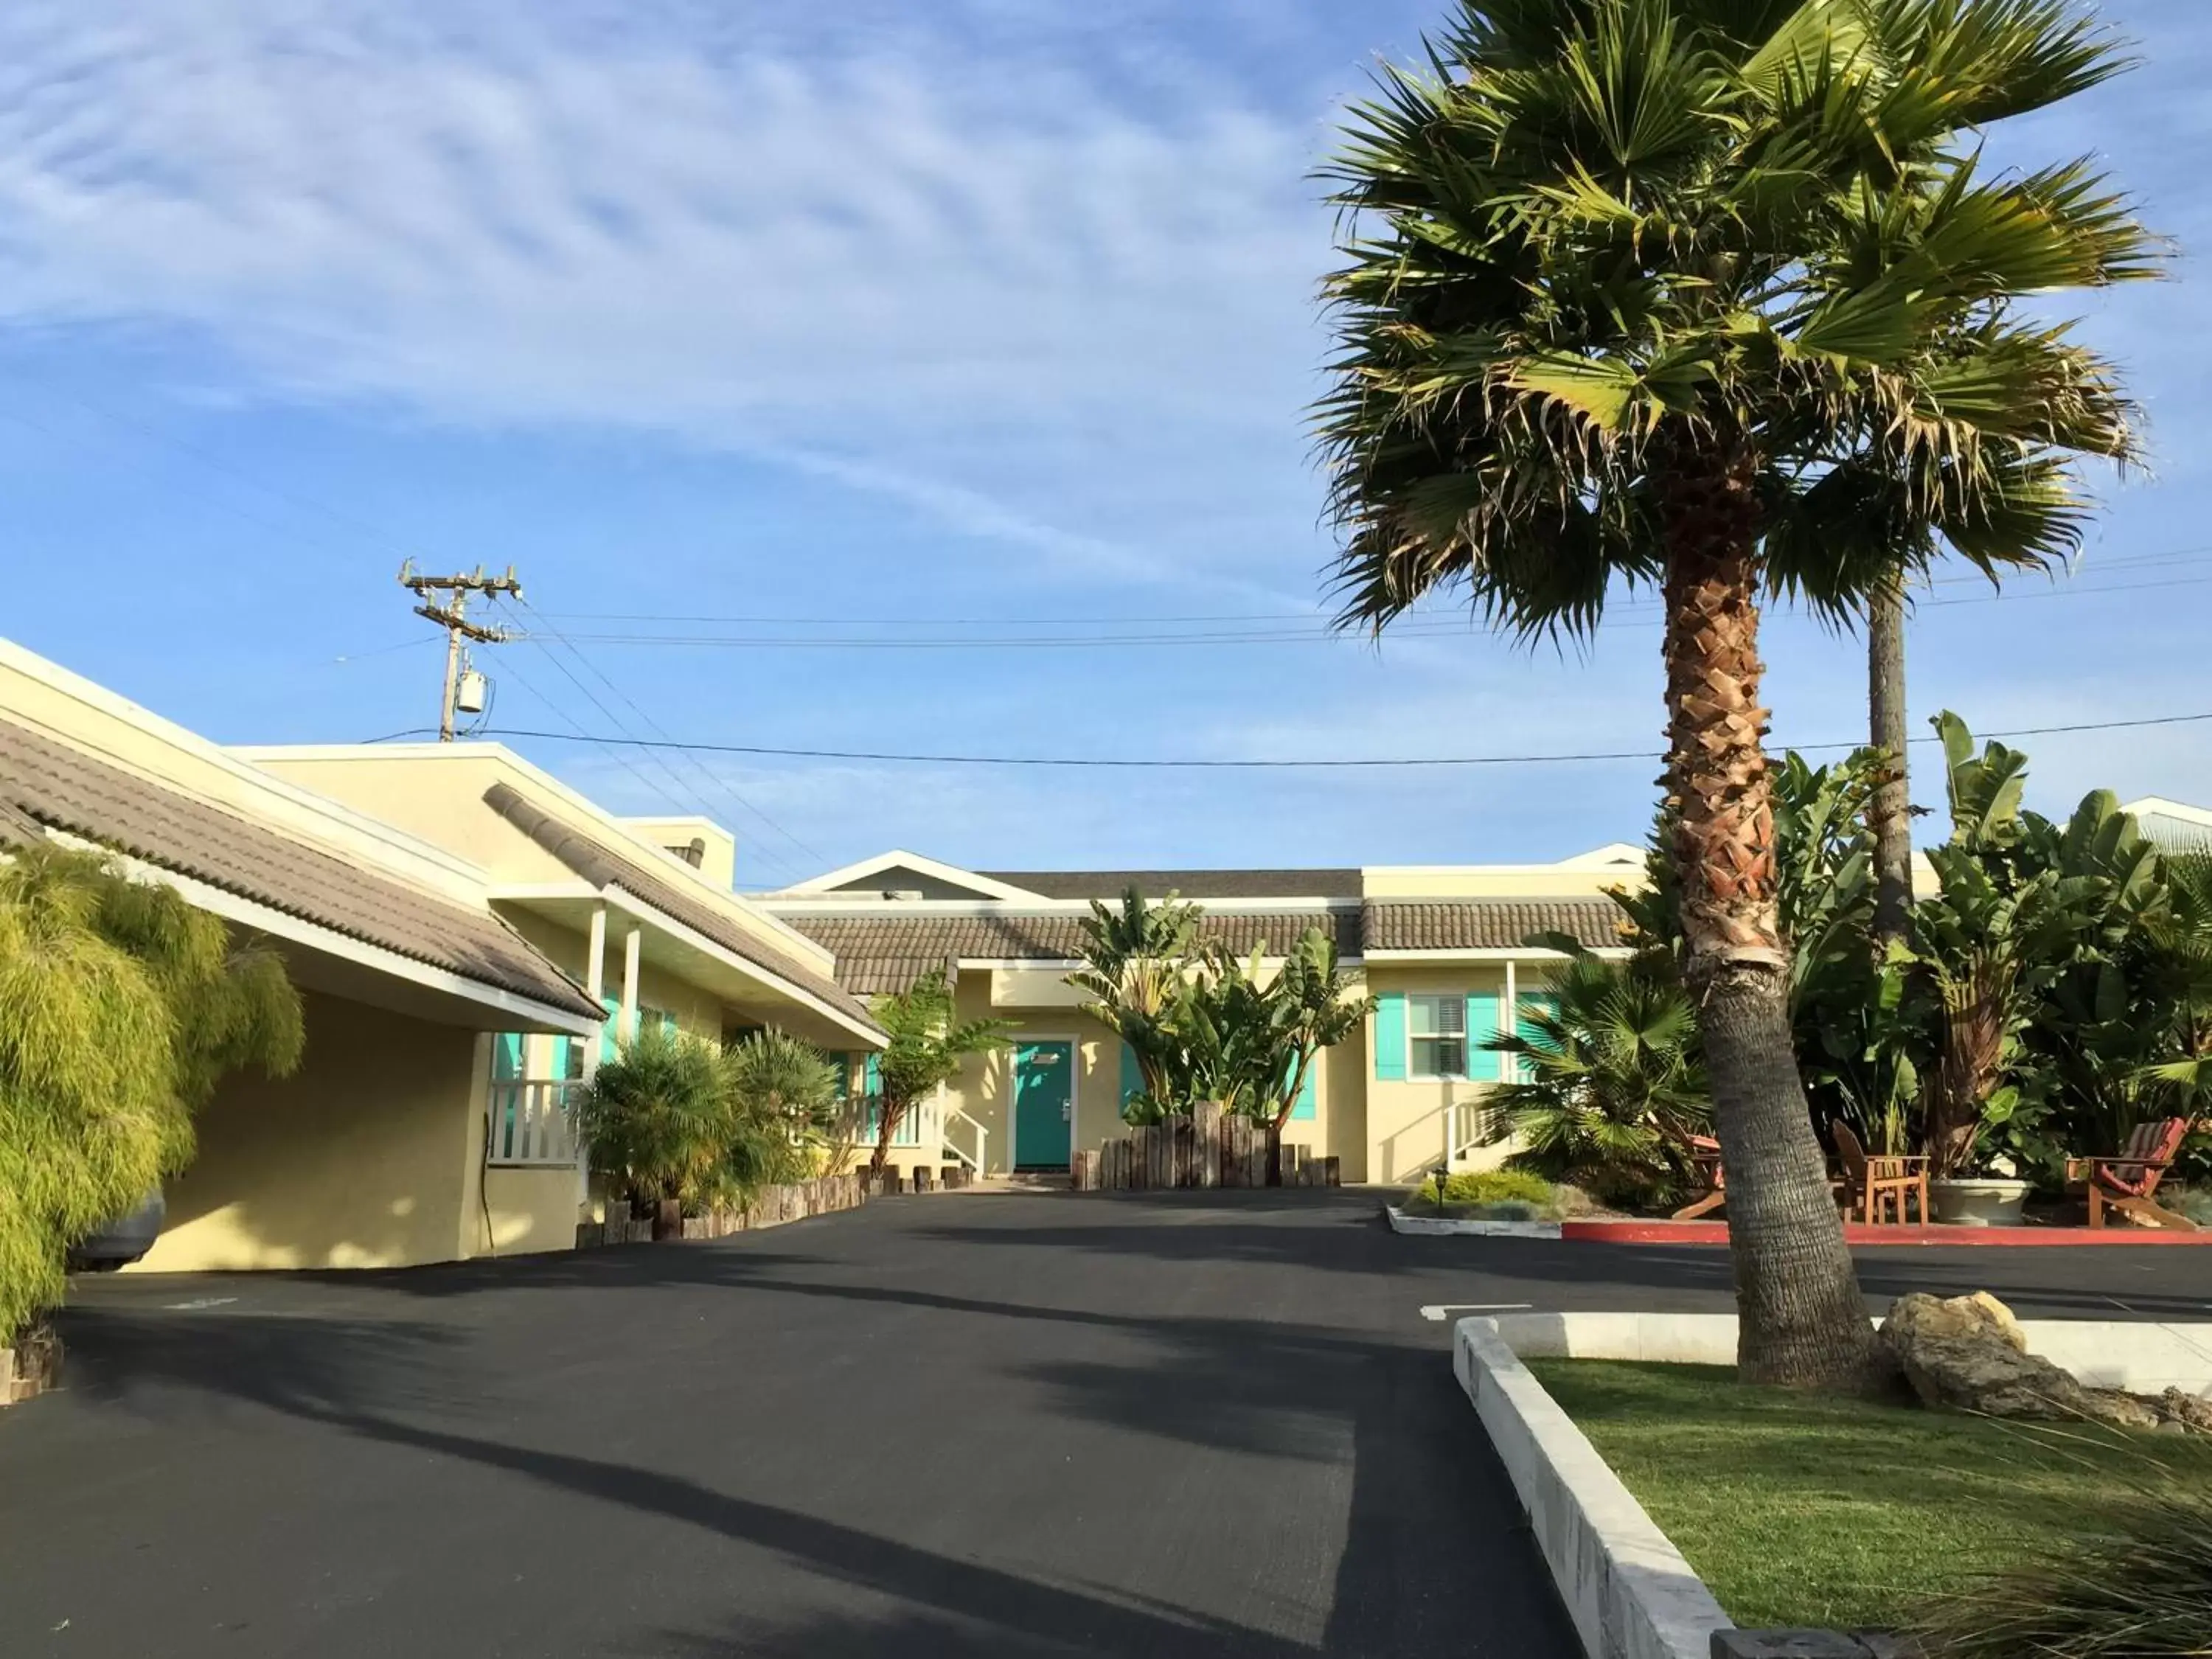 Property Building in Beach Bungalow Inn and Suites